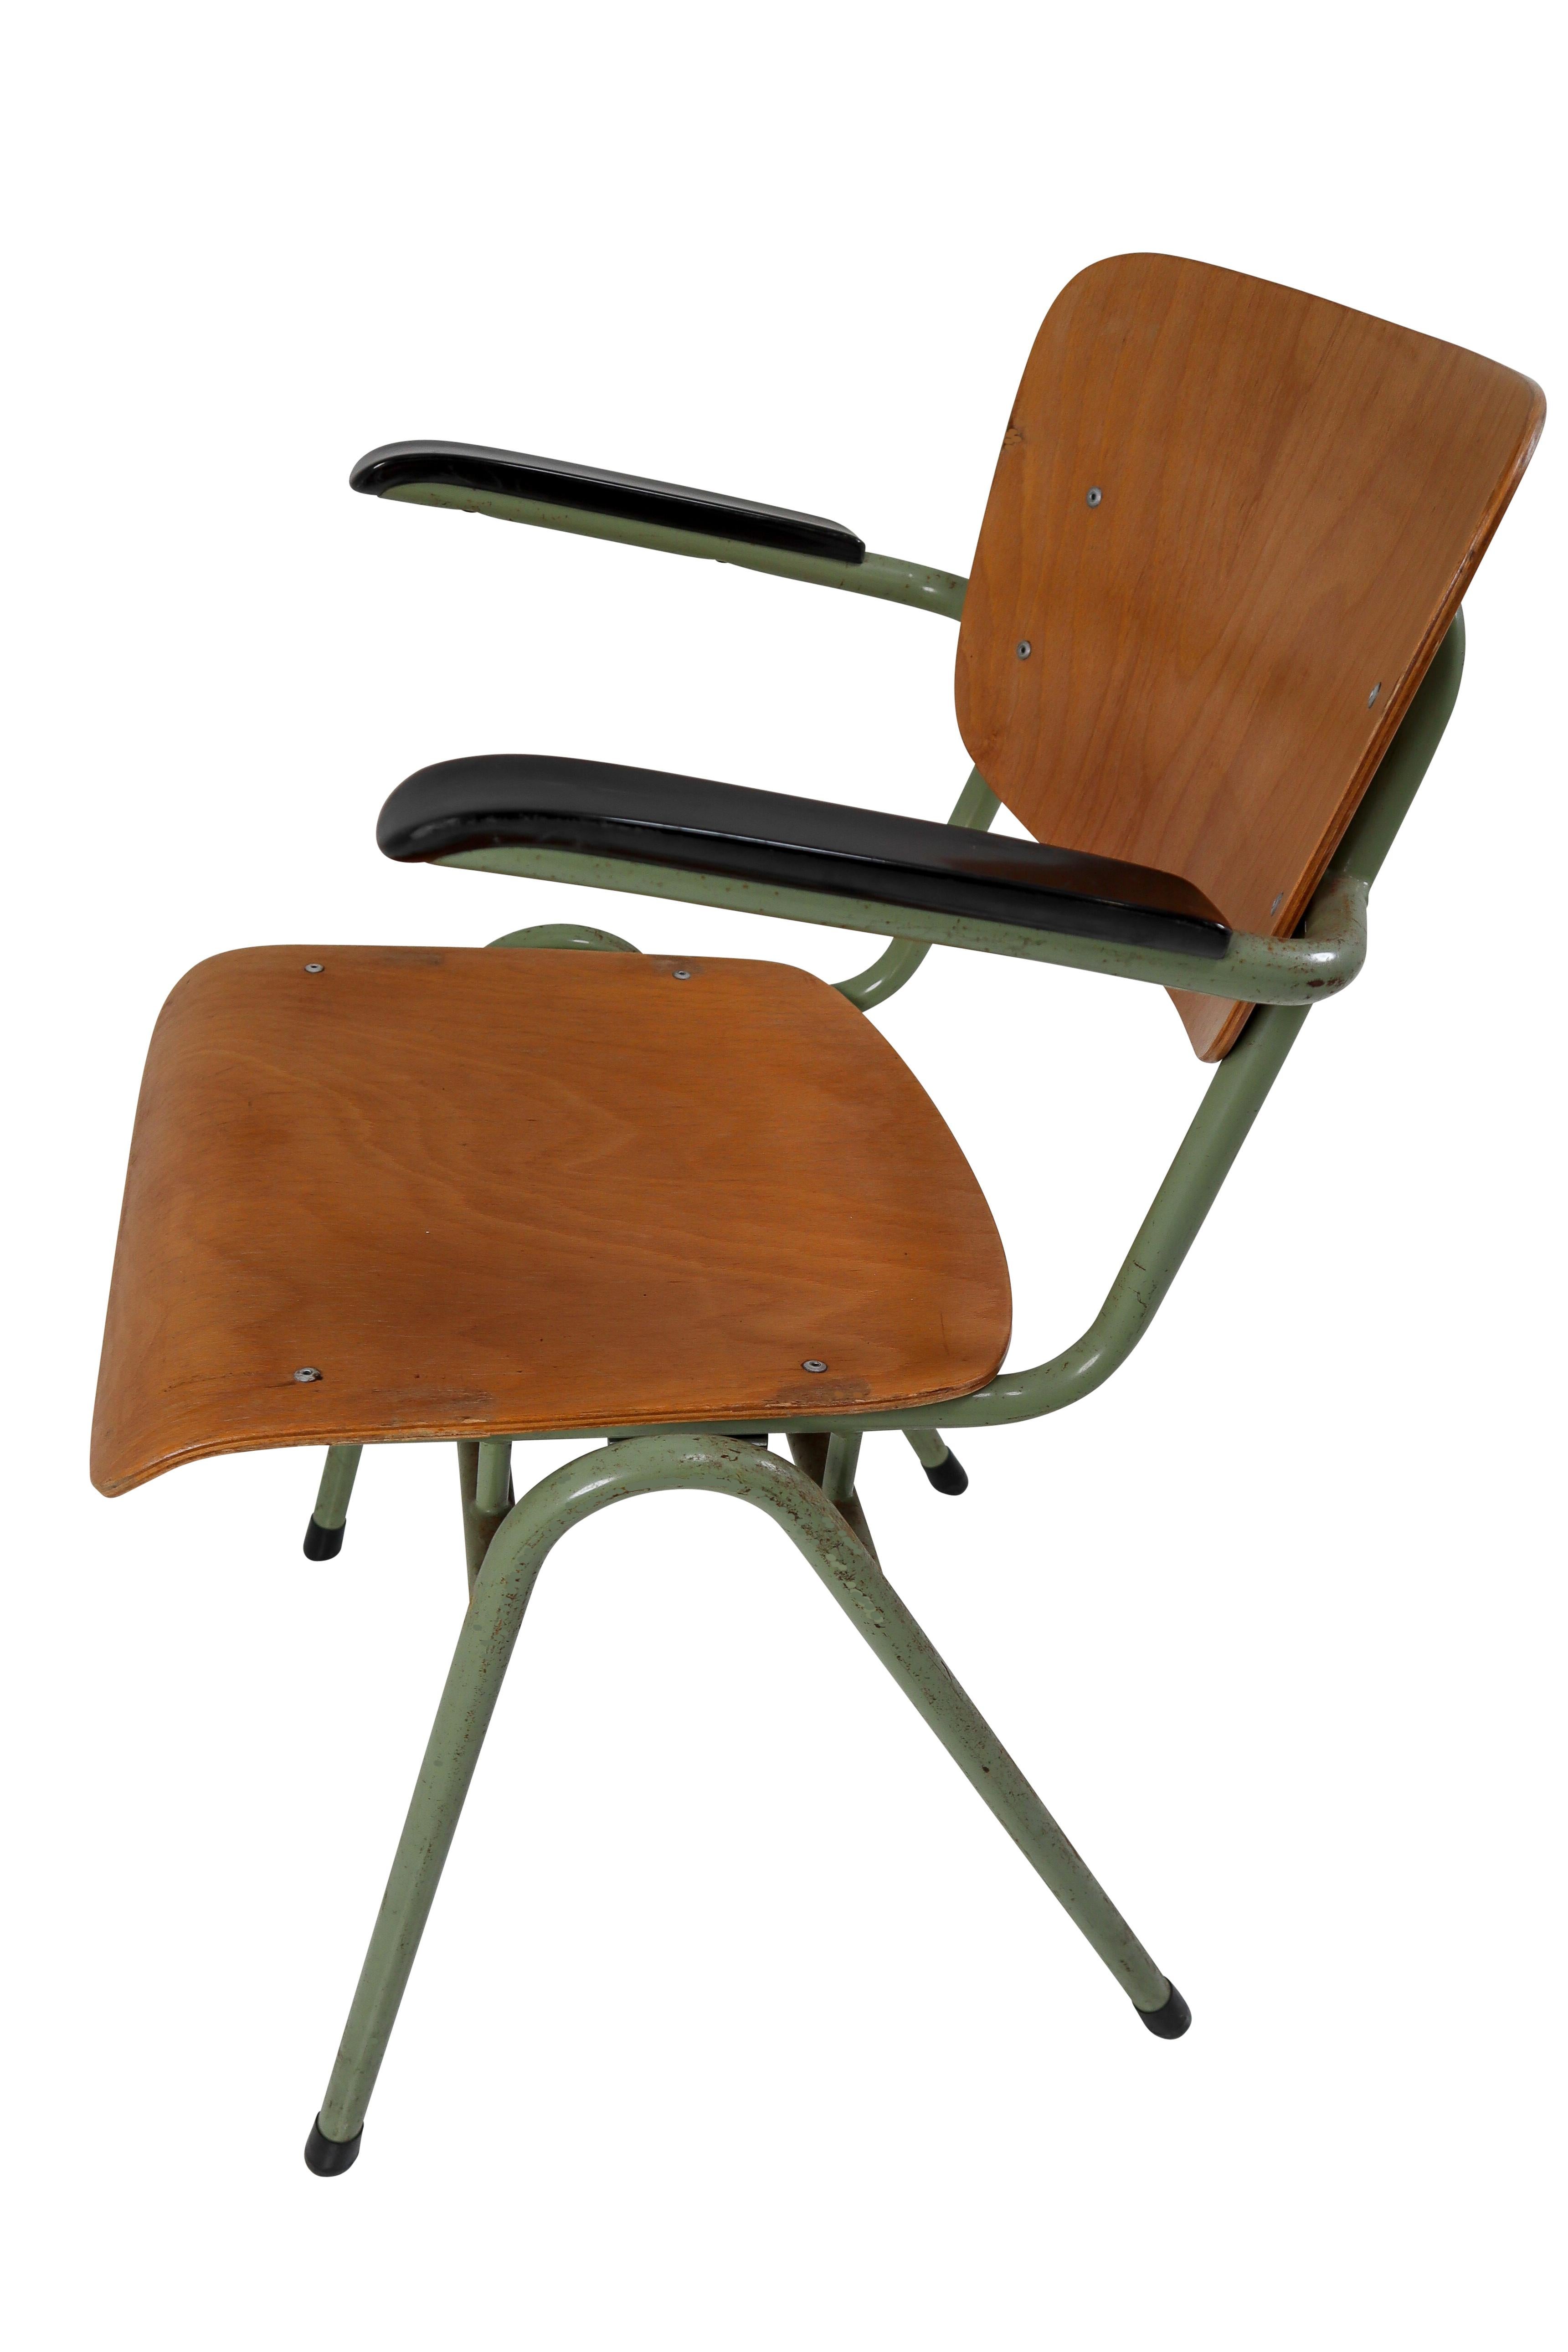 Crazy set of 100 x comfortable industrial plywood chairs, produced in Holland in the 1960s. These Dutch design chairs have a patinated green tubular metal frame and beautifully curved plywood seats. All with armrests made from bakelite and also